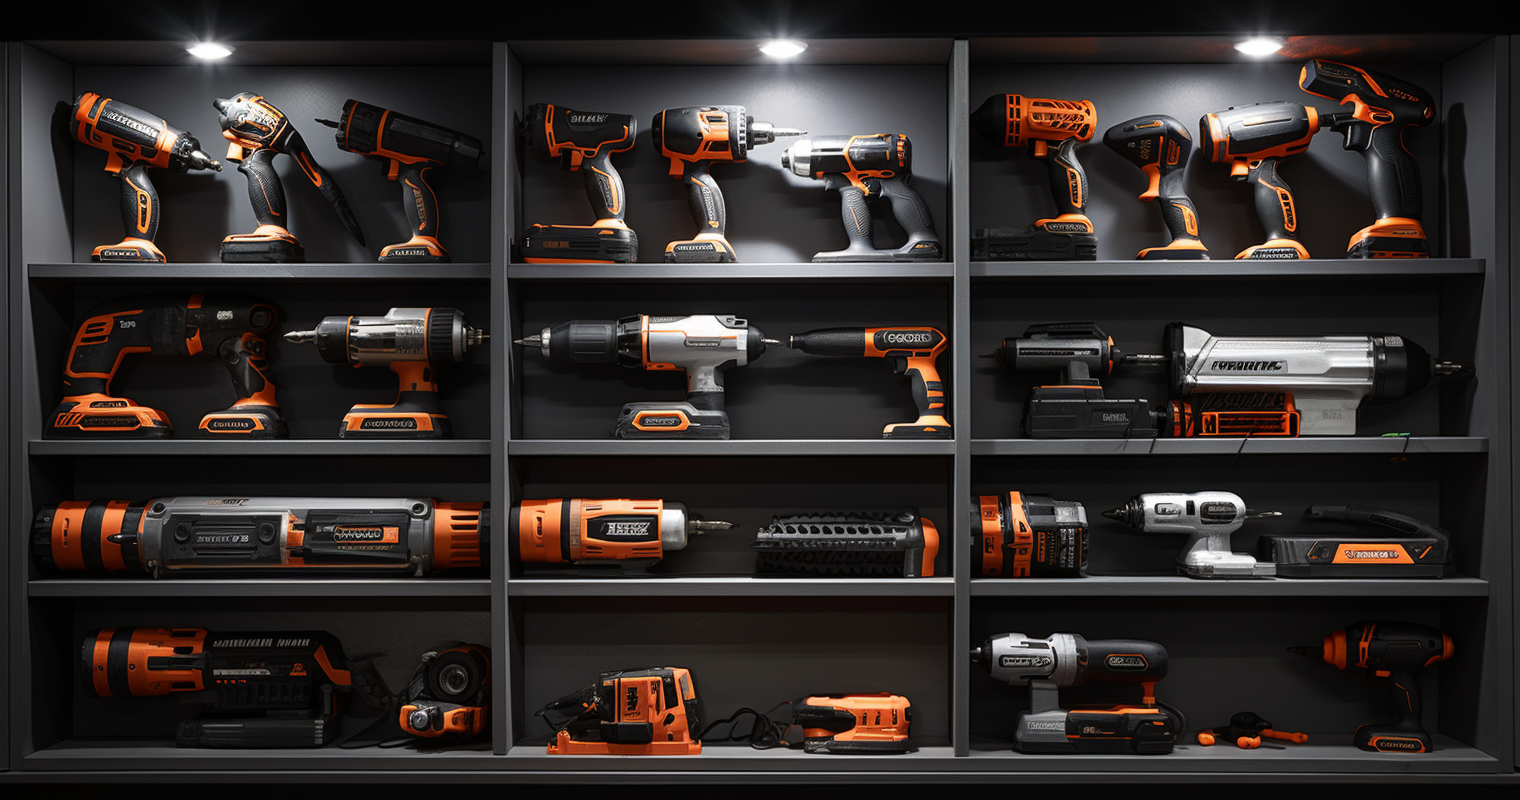 Close-up of a Shelf with Black and Decker Power Tools